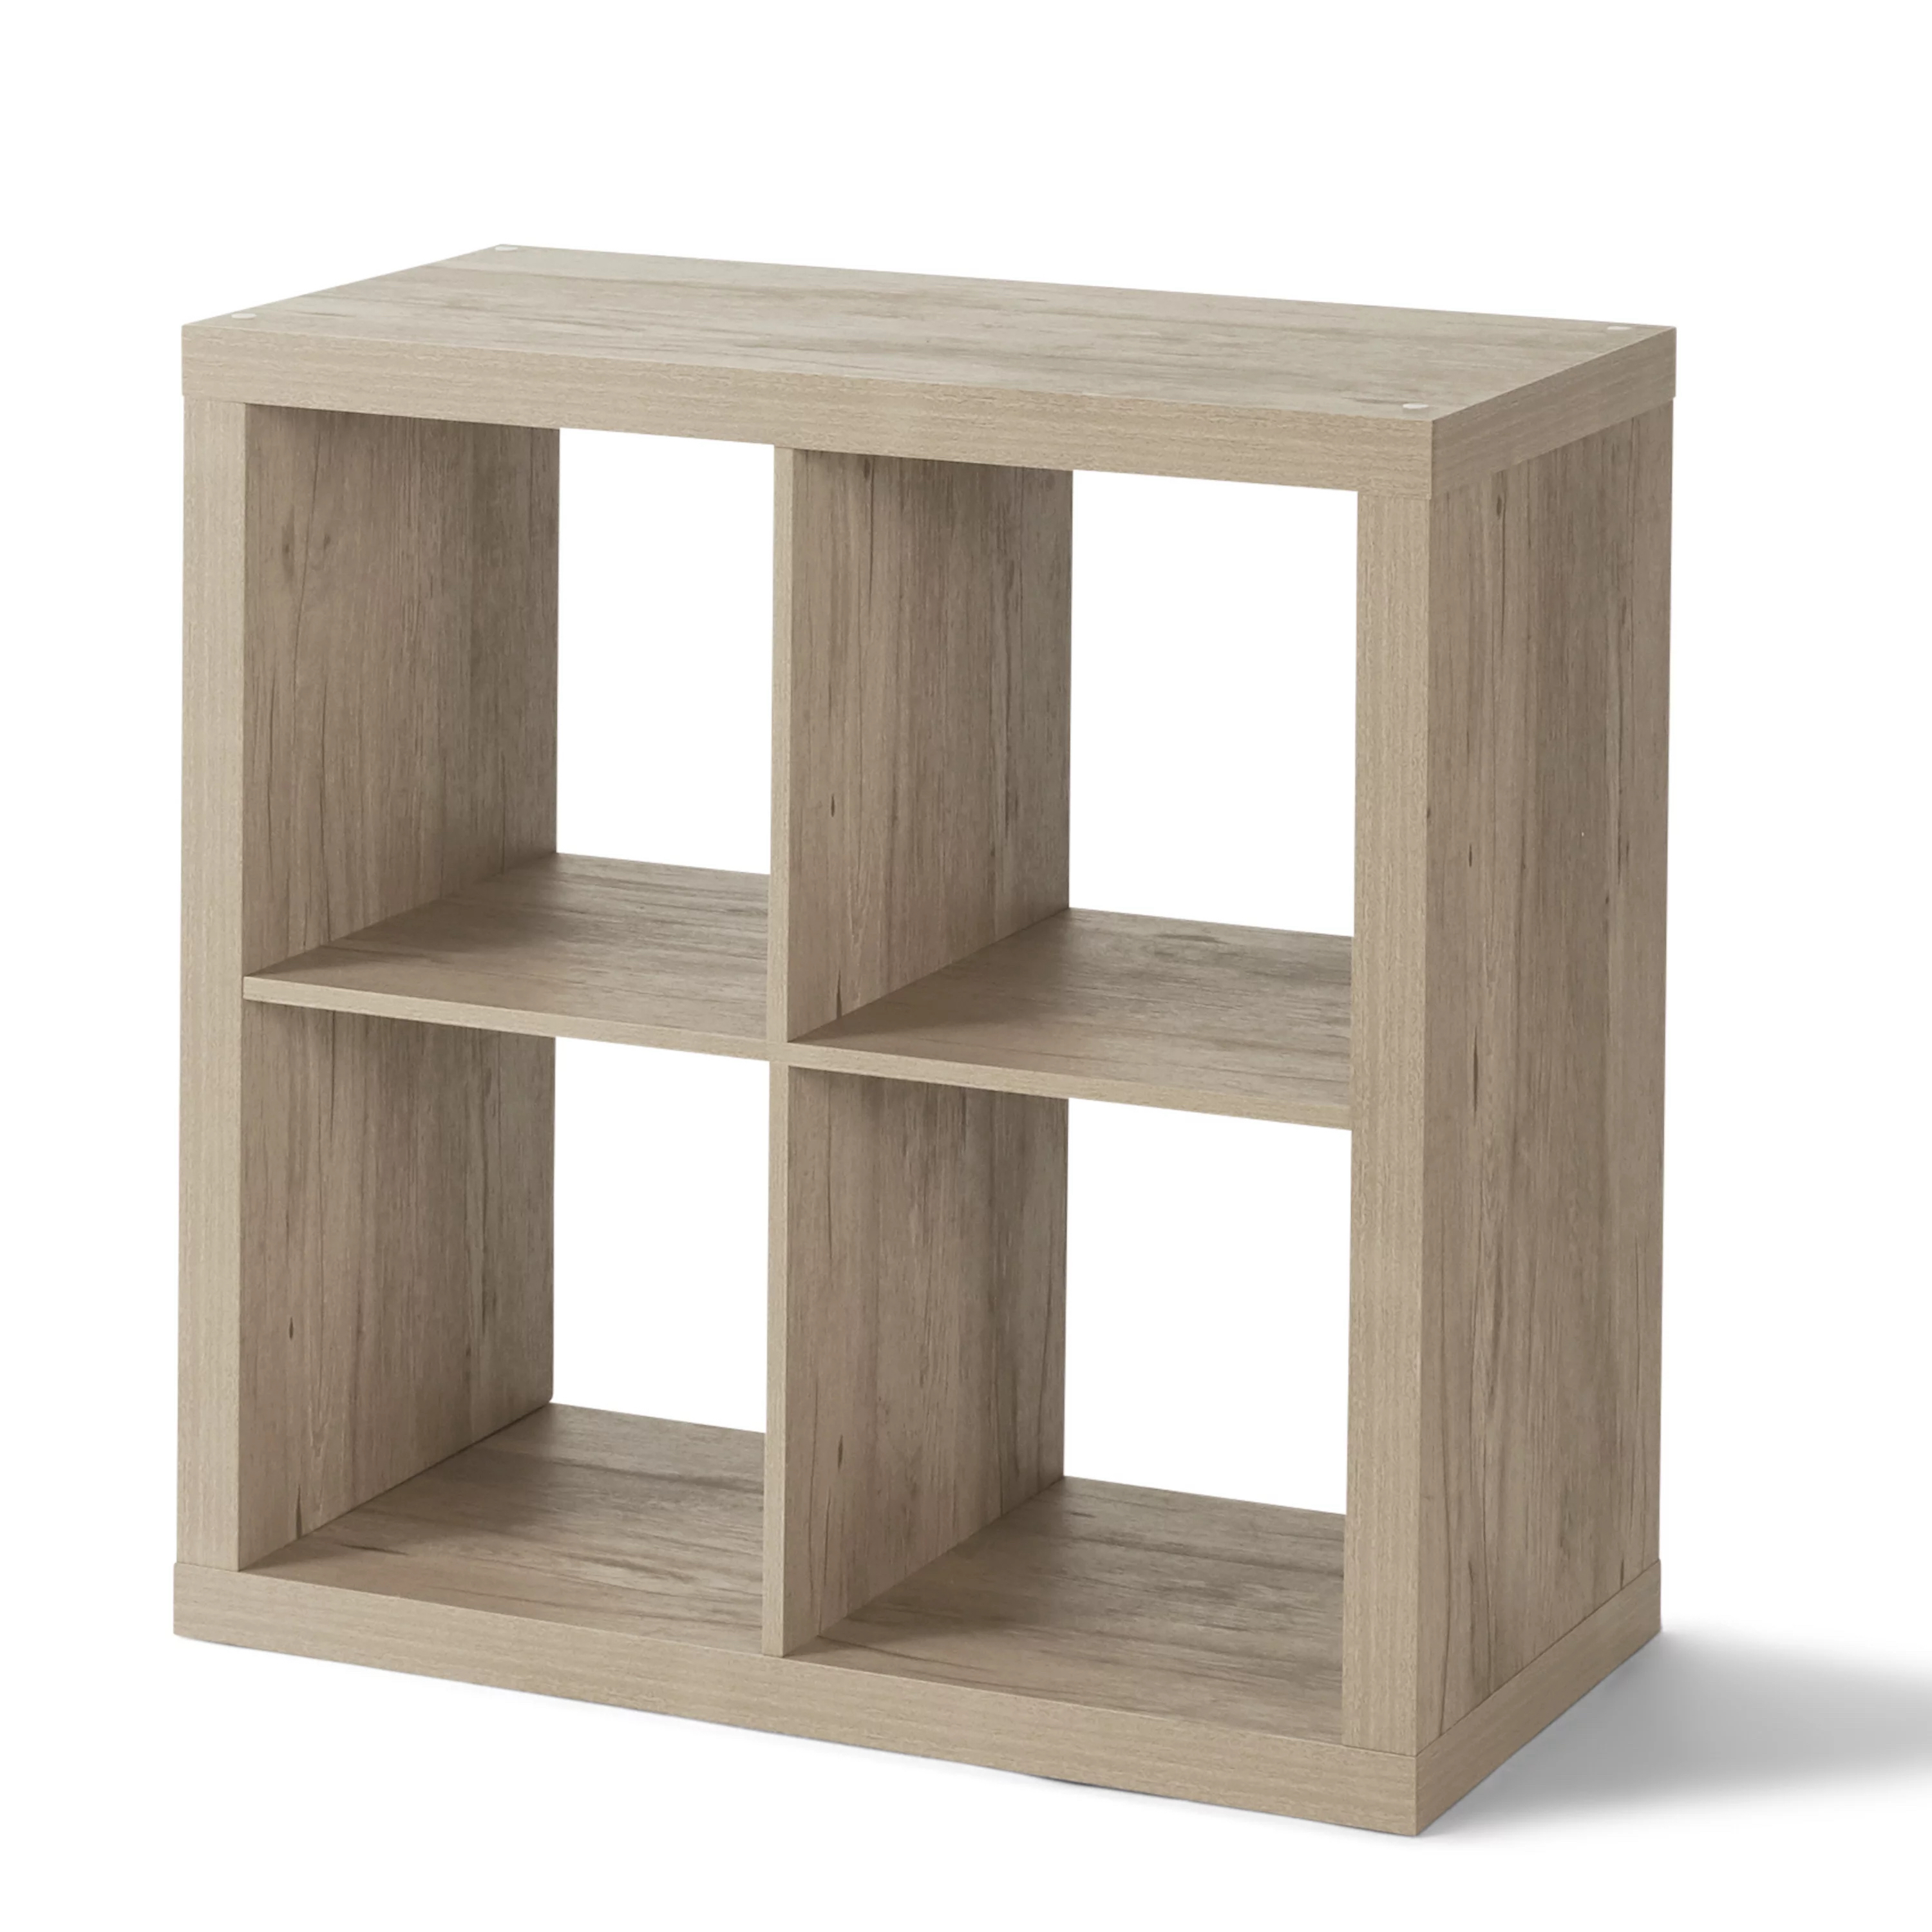 Better Homes & Gardens 4-Cube Storage Organizer, Natural - image 3 of 12